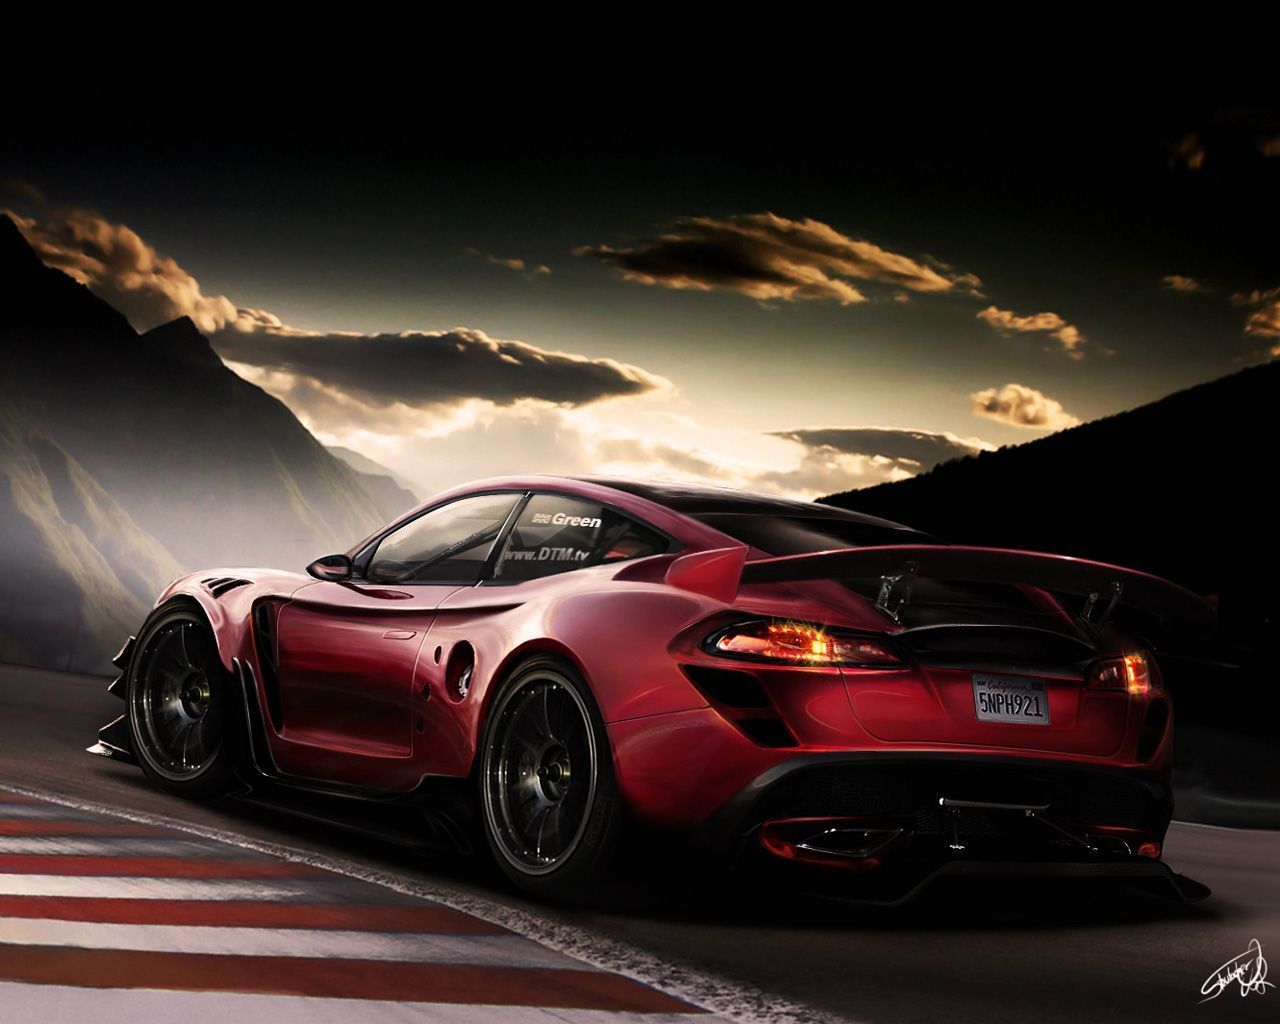 Wallpapers Tuning Cars Image Download